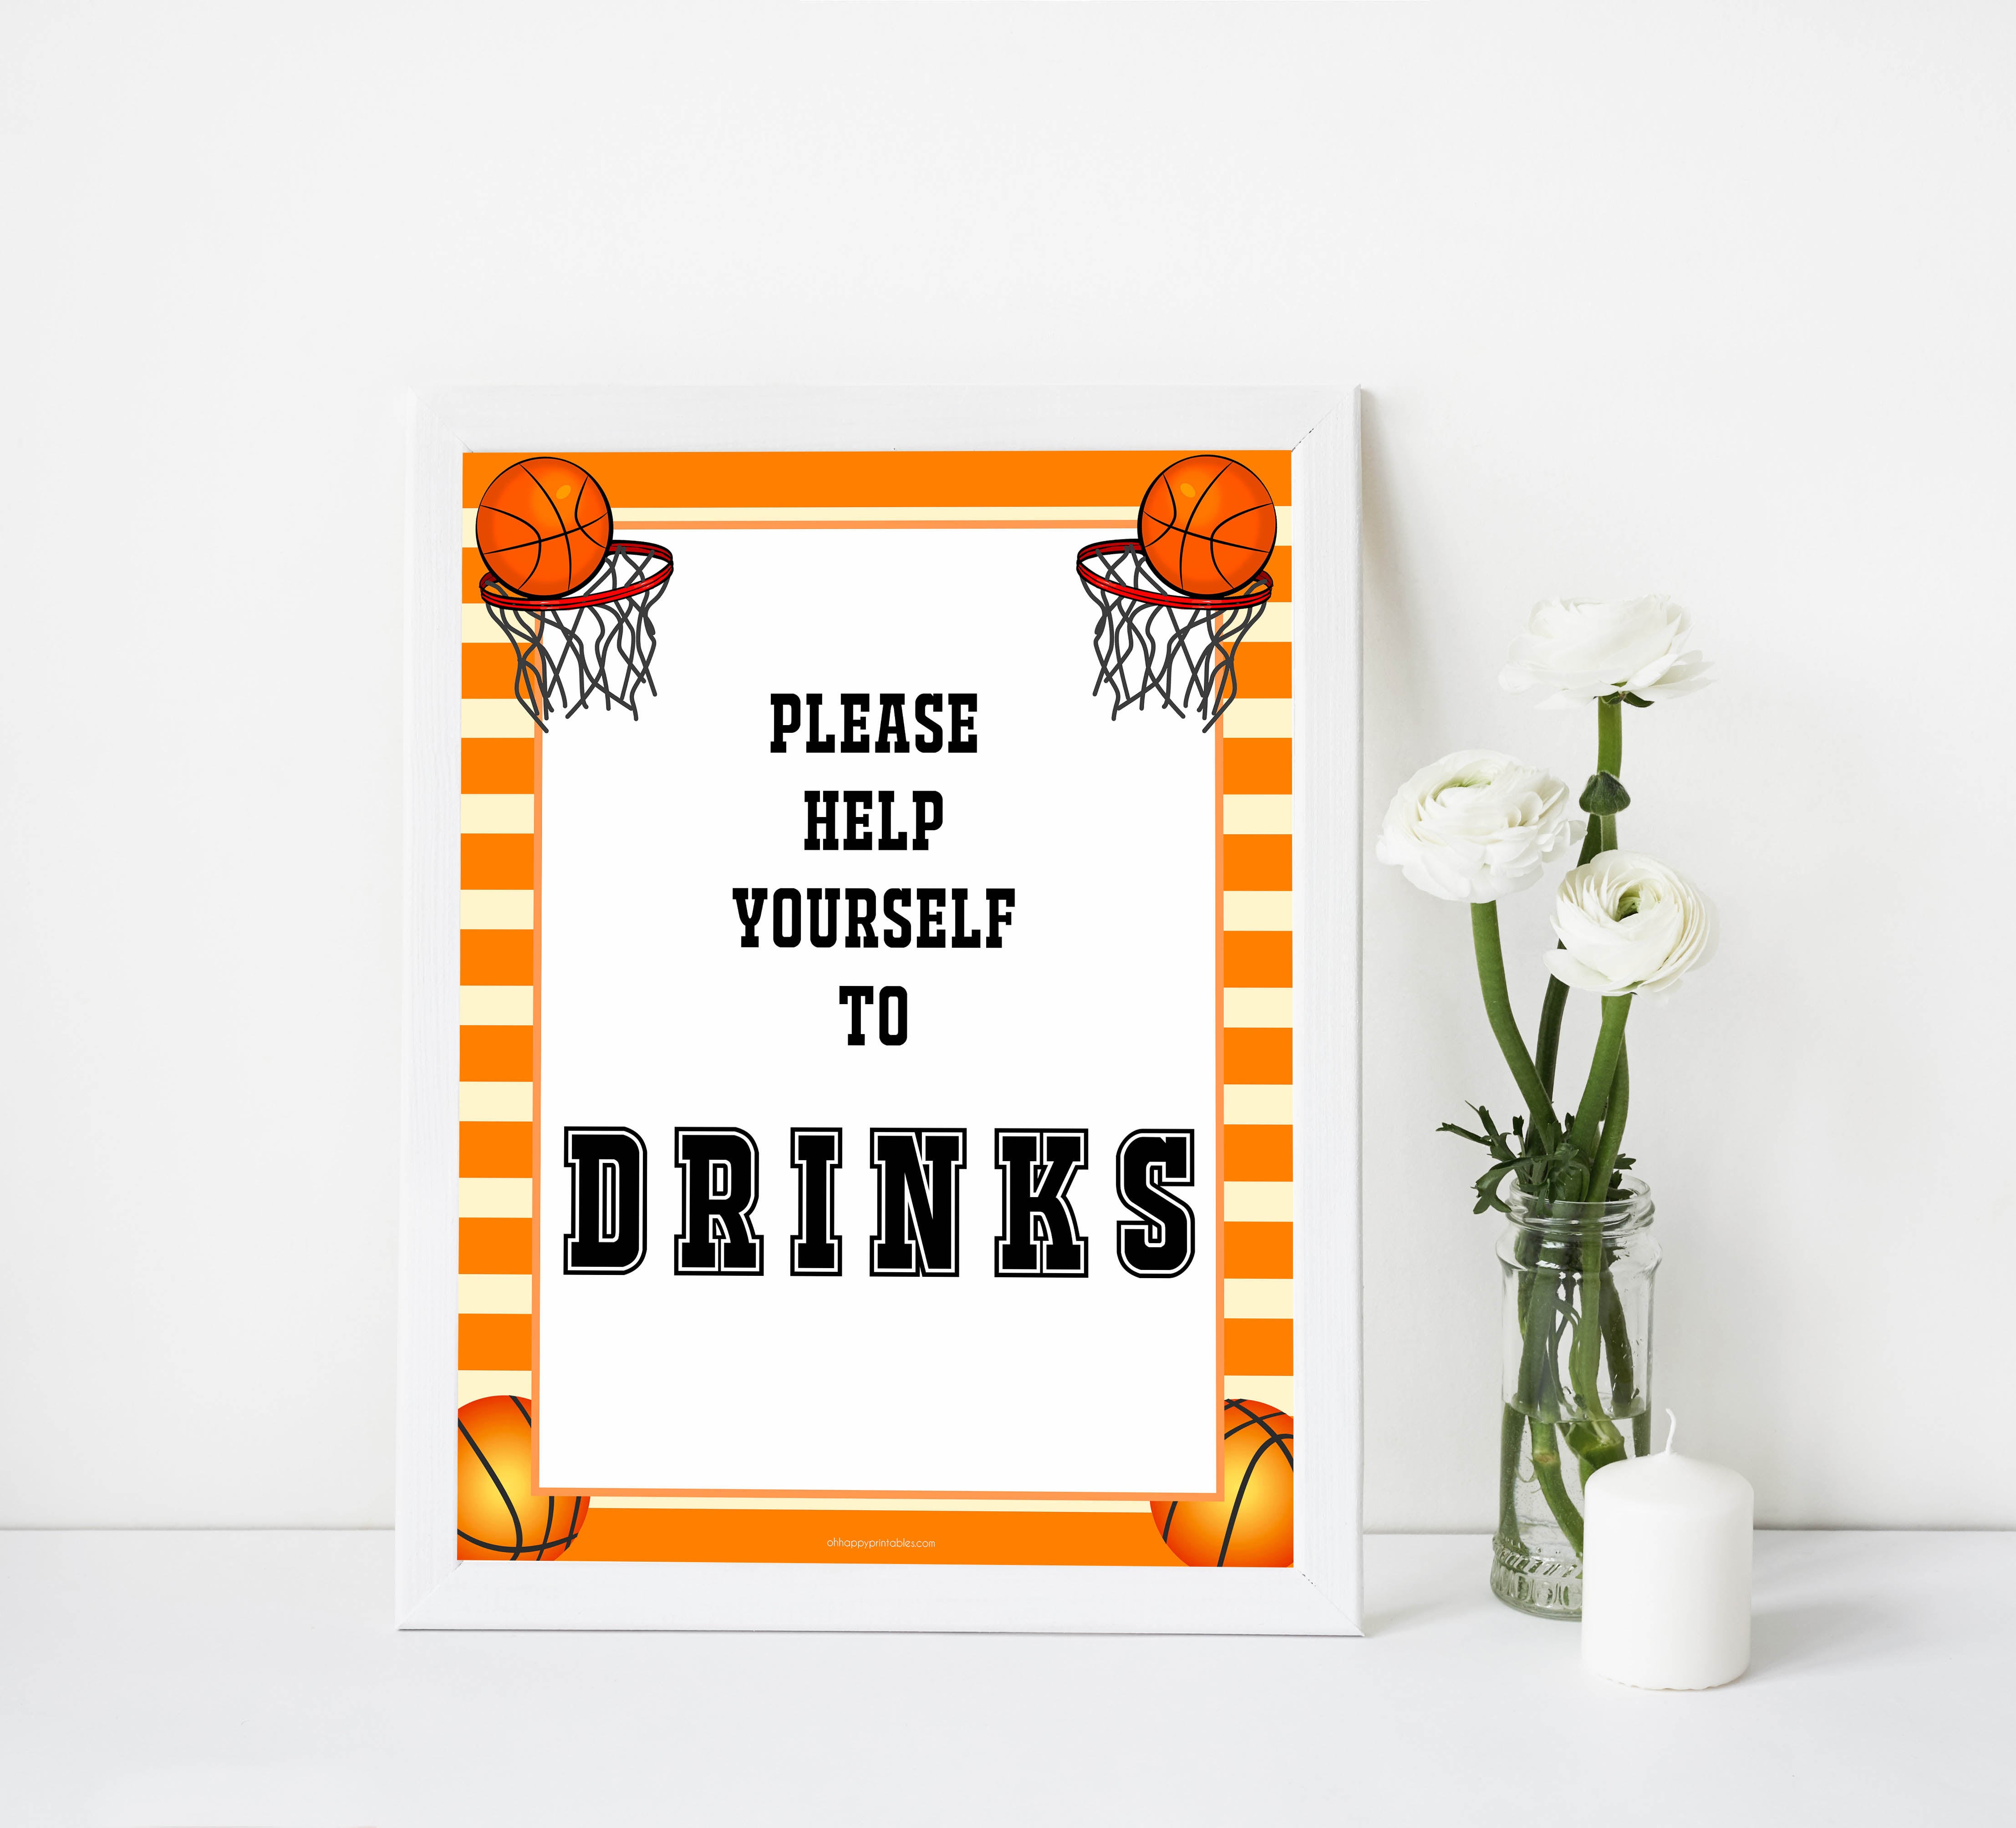 drinks baby table signs, drinks table signs, Basketball baby decor, printable baby table signs, printable baby decor, Basketball table signs, fun baby signs, Basketball fun baby table signs